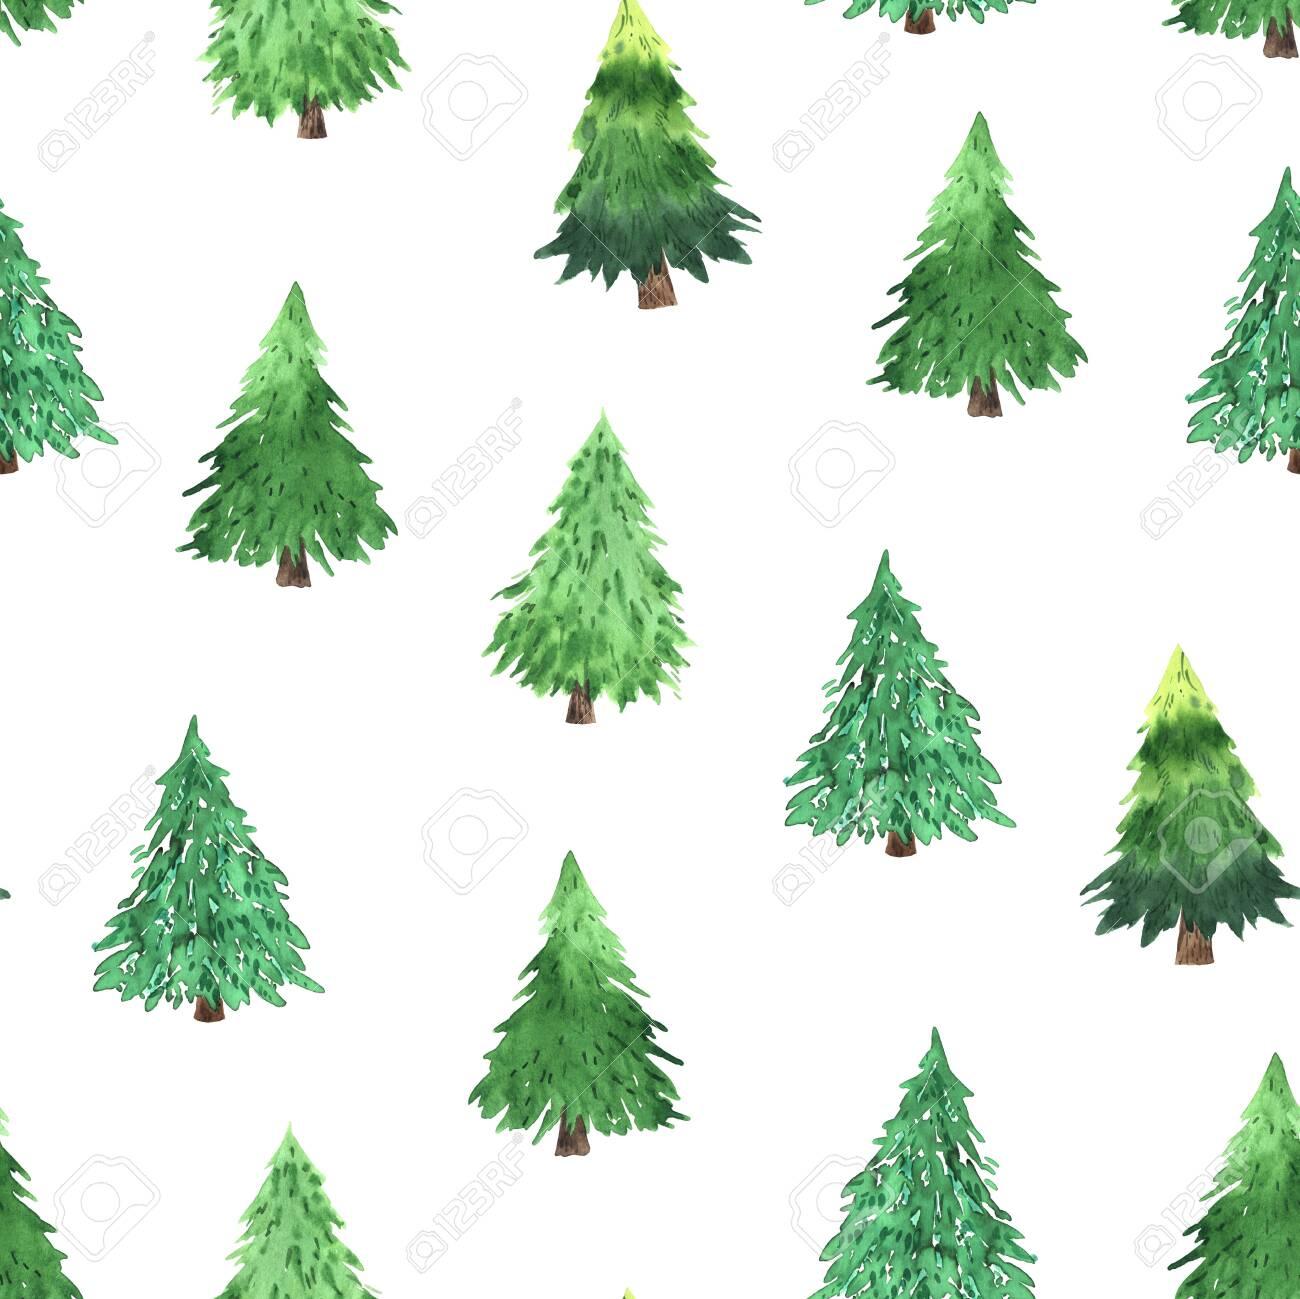 Seamless Pattern With Bright Green Christmas Tree Decorative